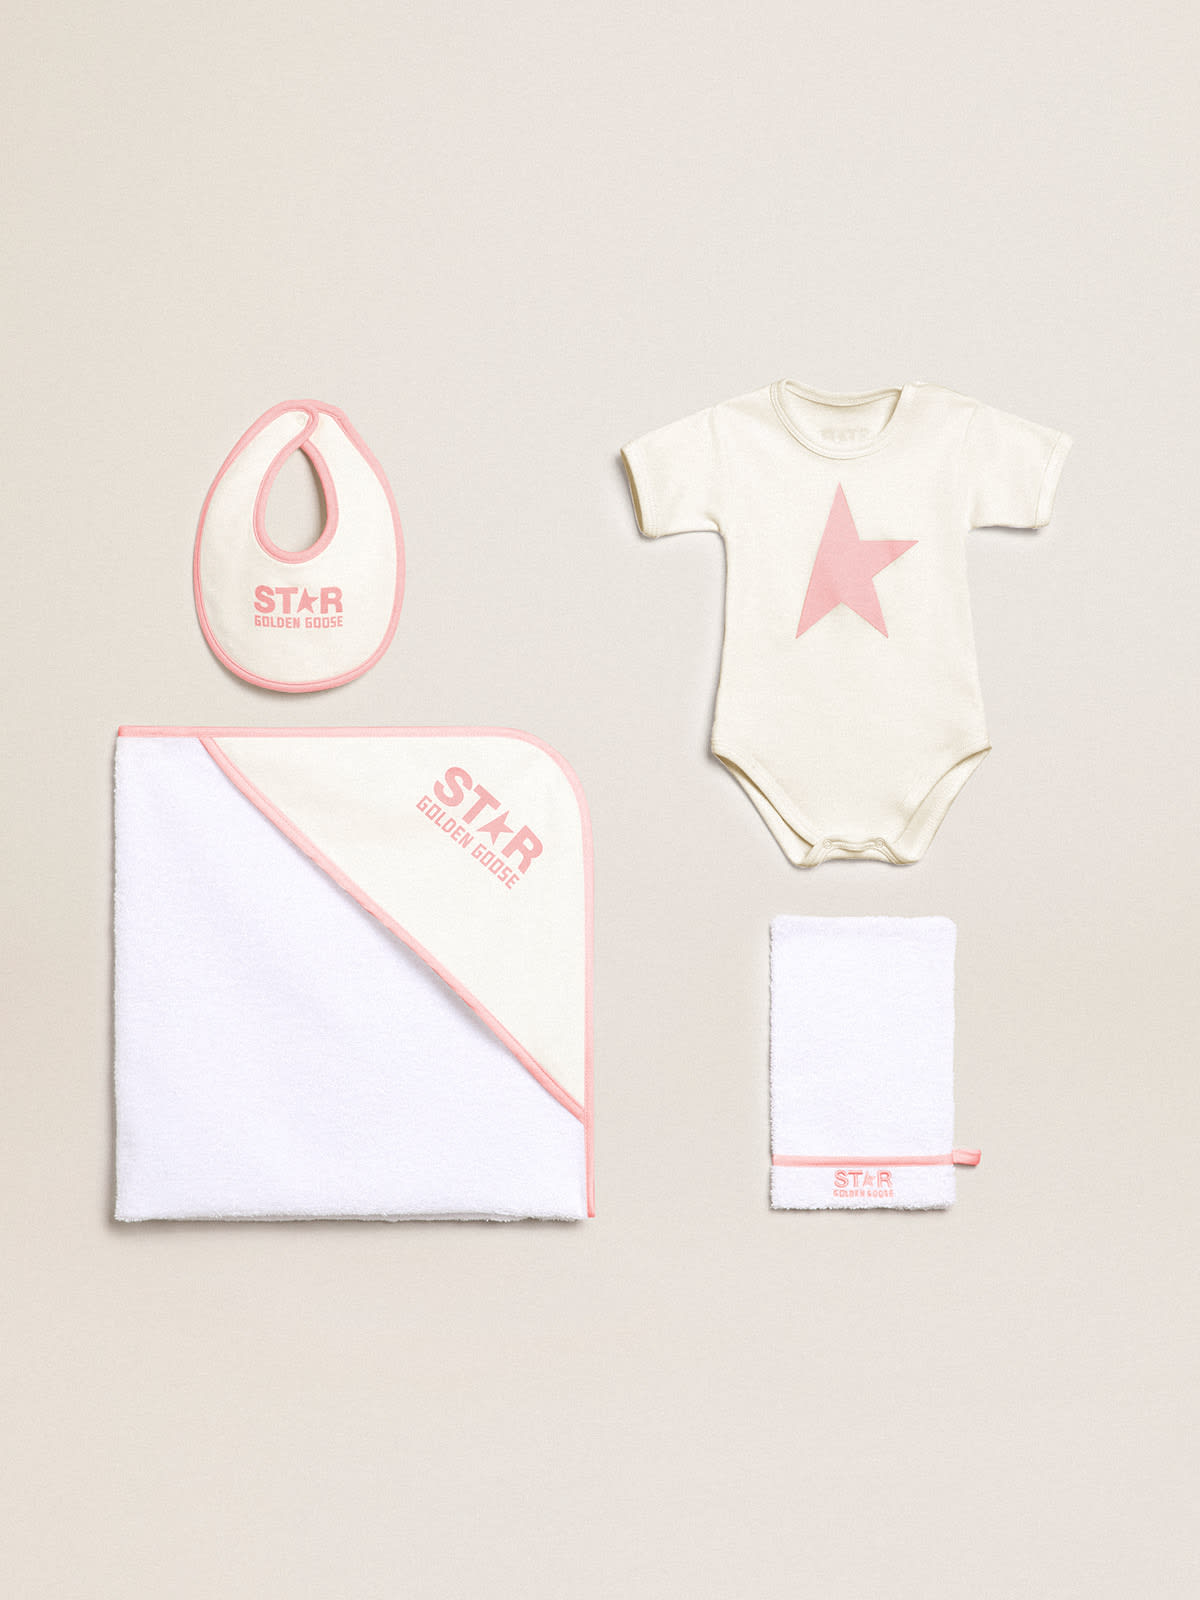 Golden Goose - Star Collection bath set gift box in white and milk white with contrasting pink edging and logo in 